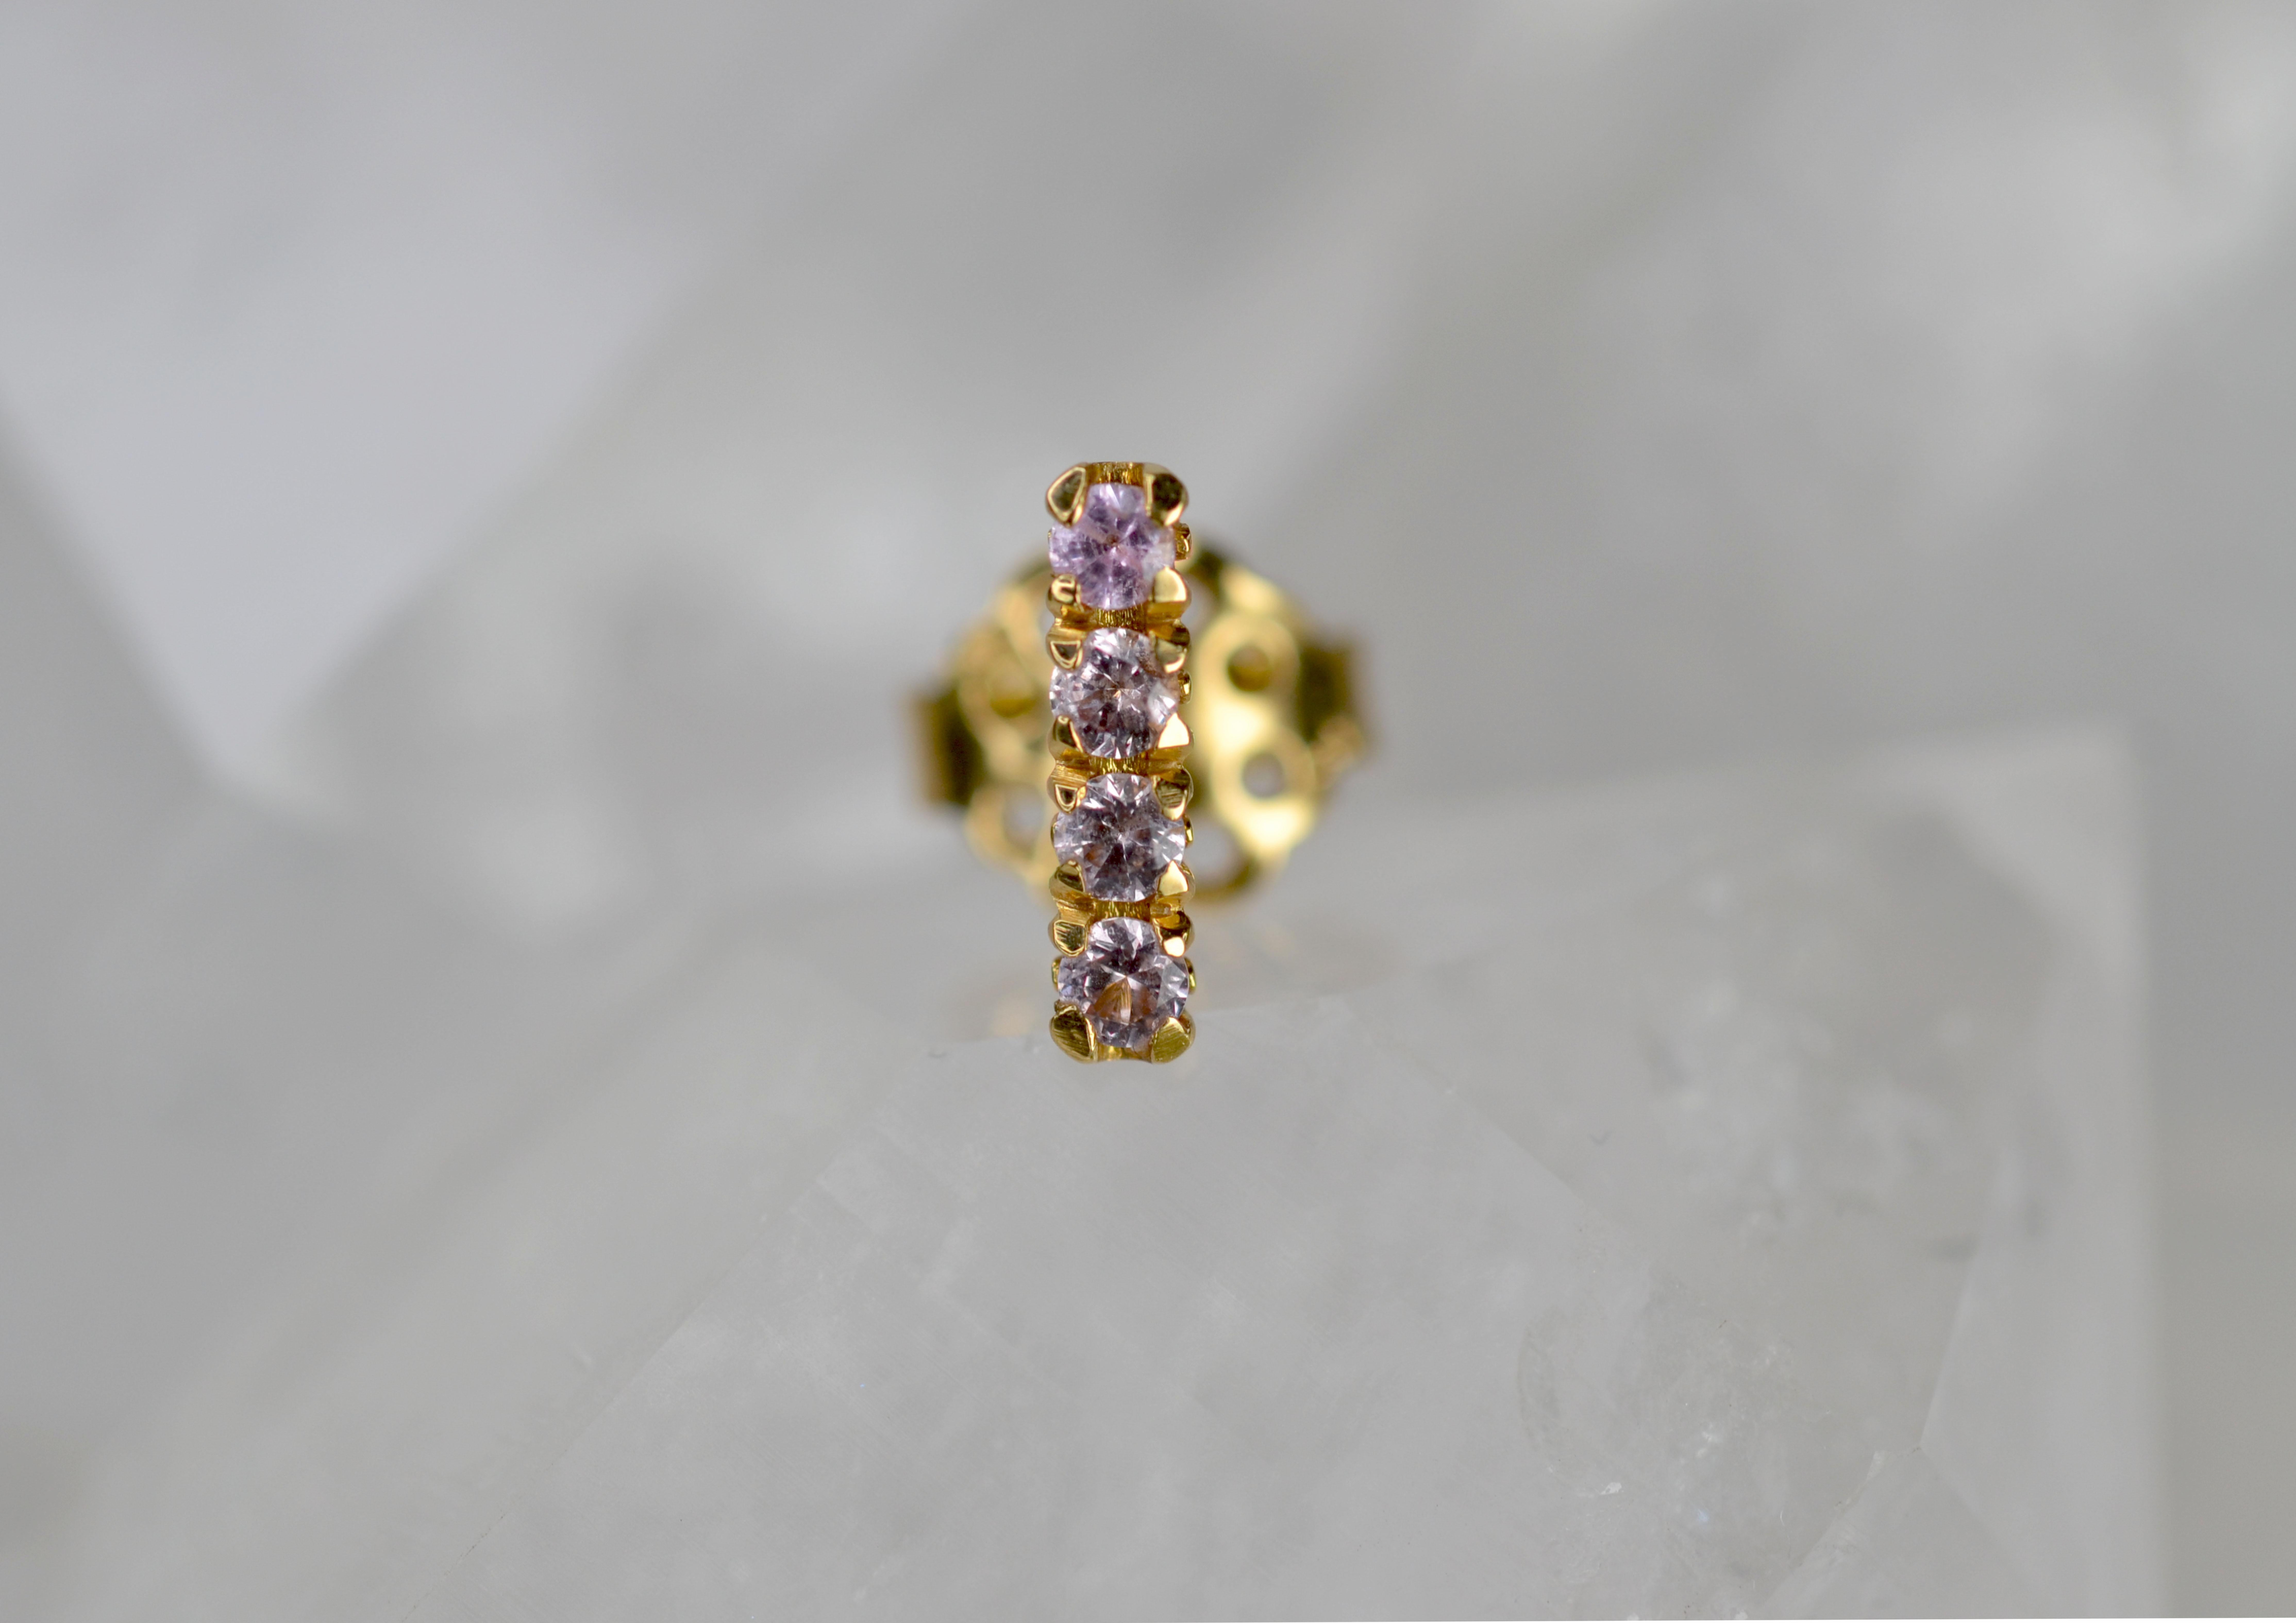 This single earring stud is part of our Blossom Collection of mix and match pieces. The glistening champagne garnets are set on an 18k gold blossom flower collet to be worn alongside your favourite pair of earrings, our blossom hoops, or combine